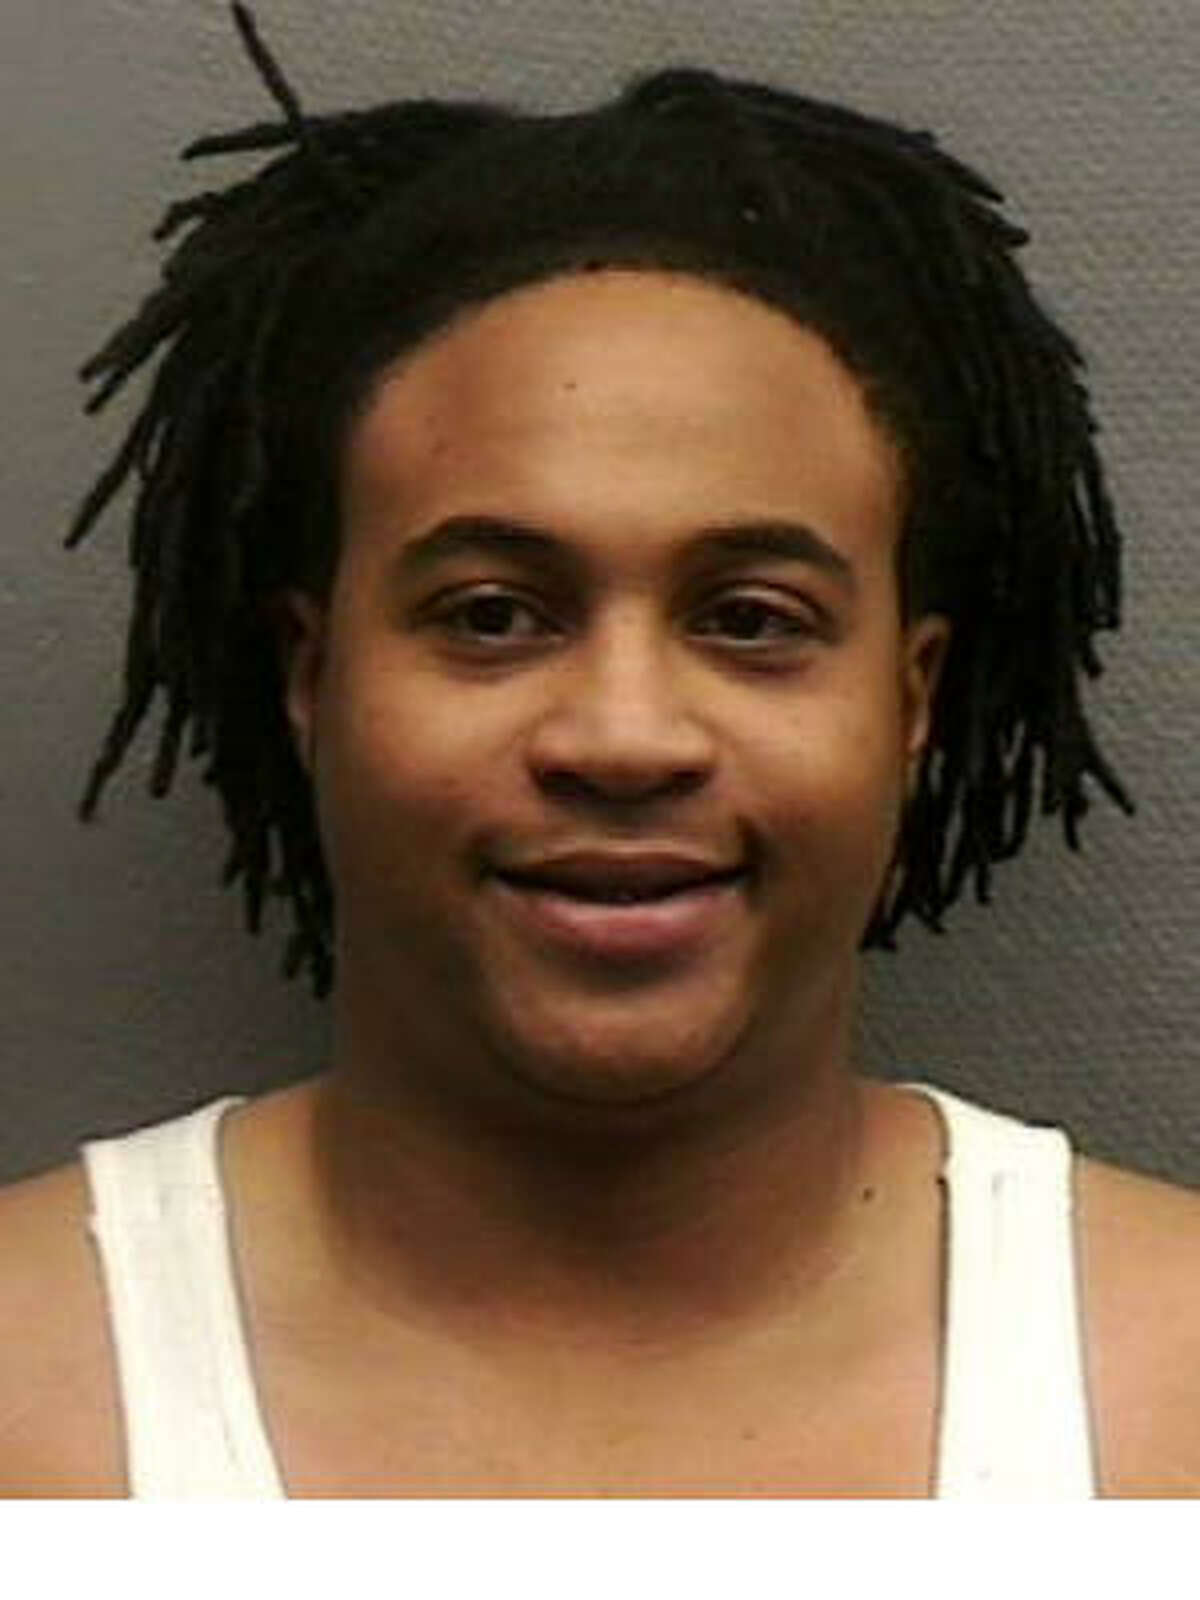 Orlando Brown, 19, an actor in Disney Channel's That's So Raven, was arrested after police pulled him over about 1 a.m. in the 4200 block of Westheimer.